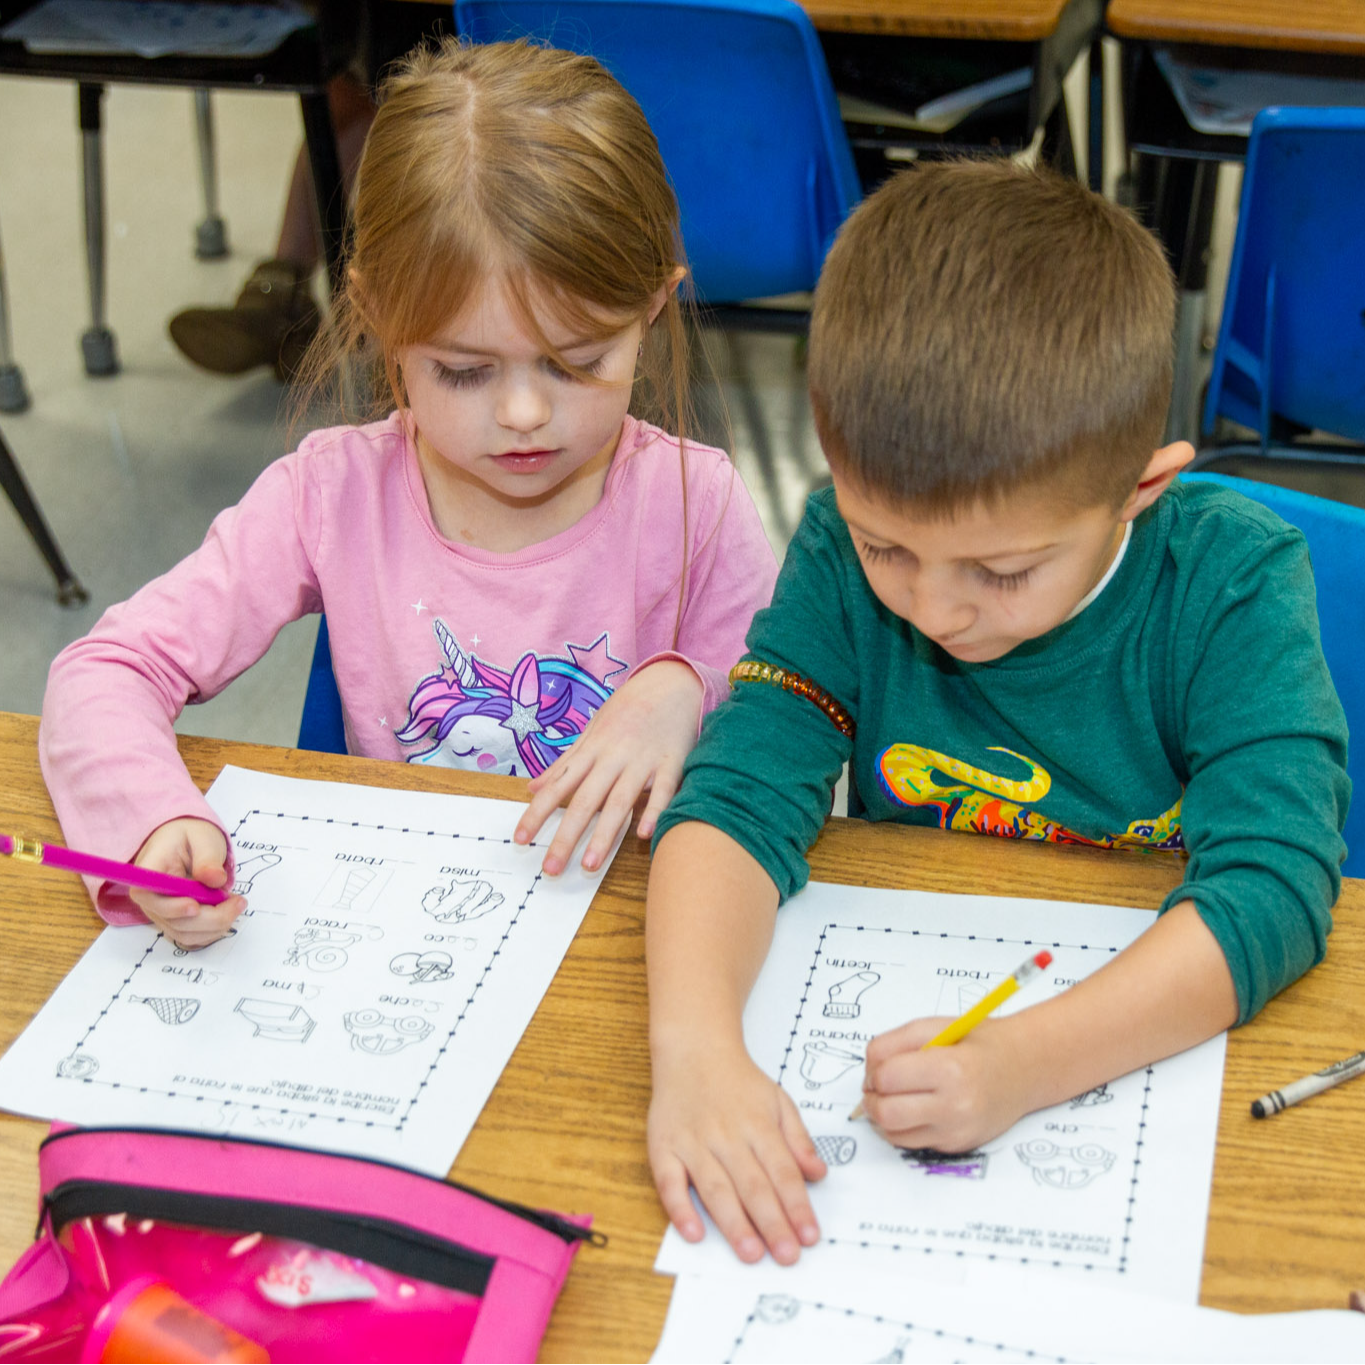 Two kindergarten students work on a paper activity at their desks